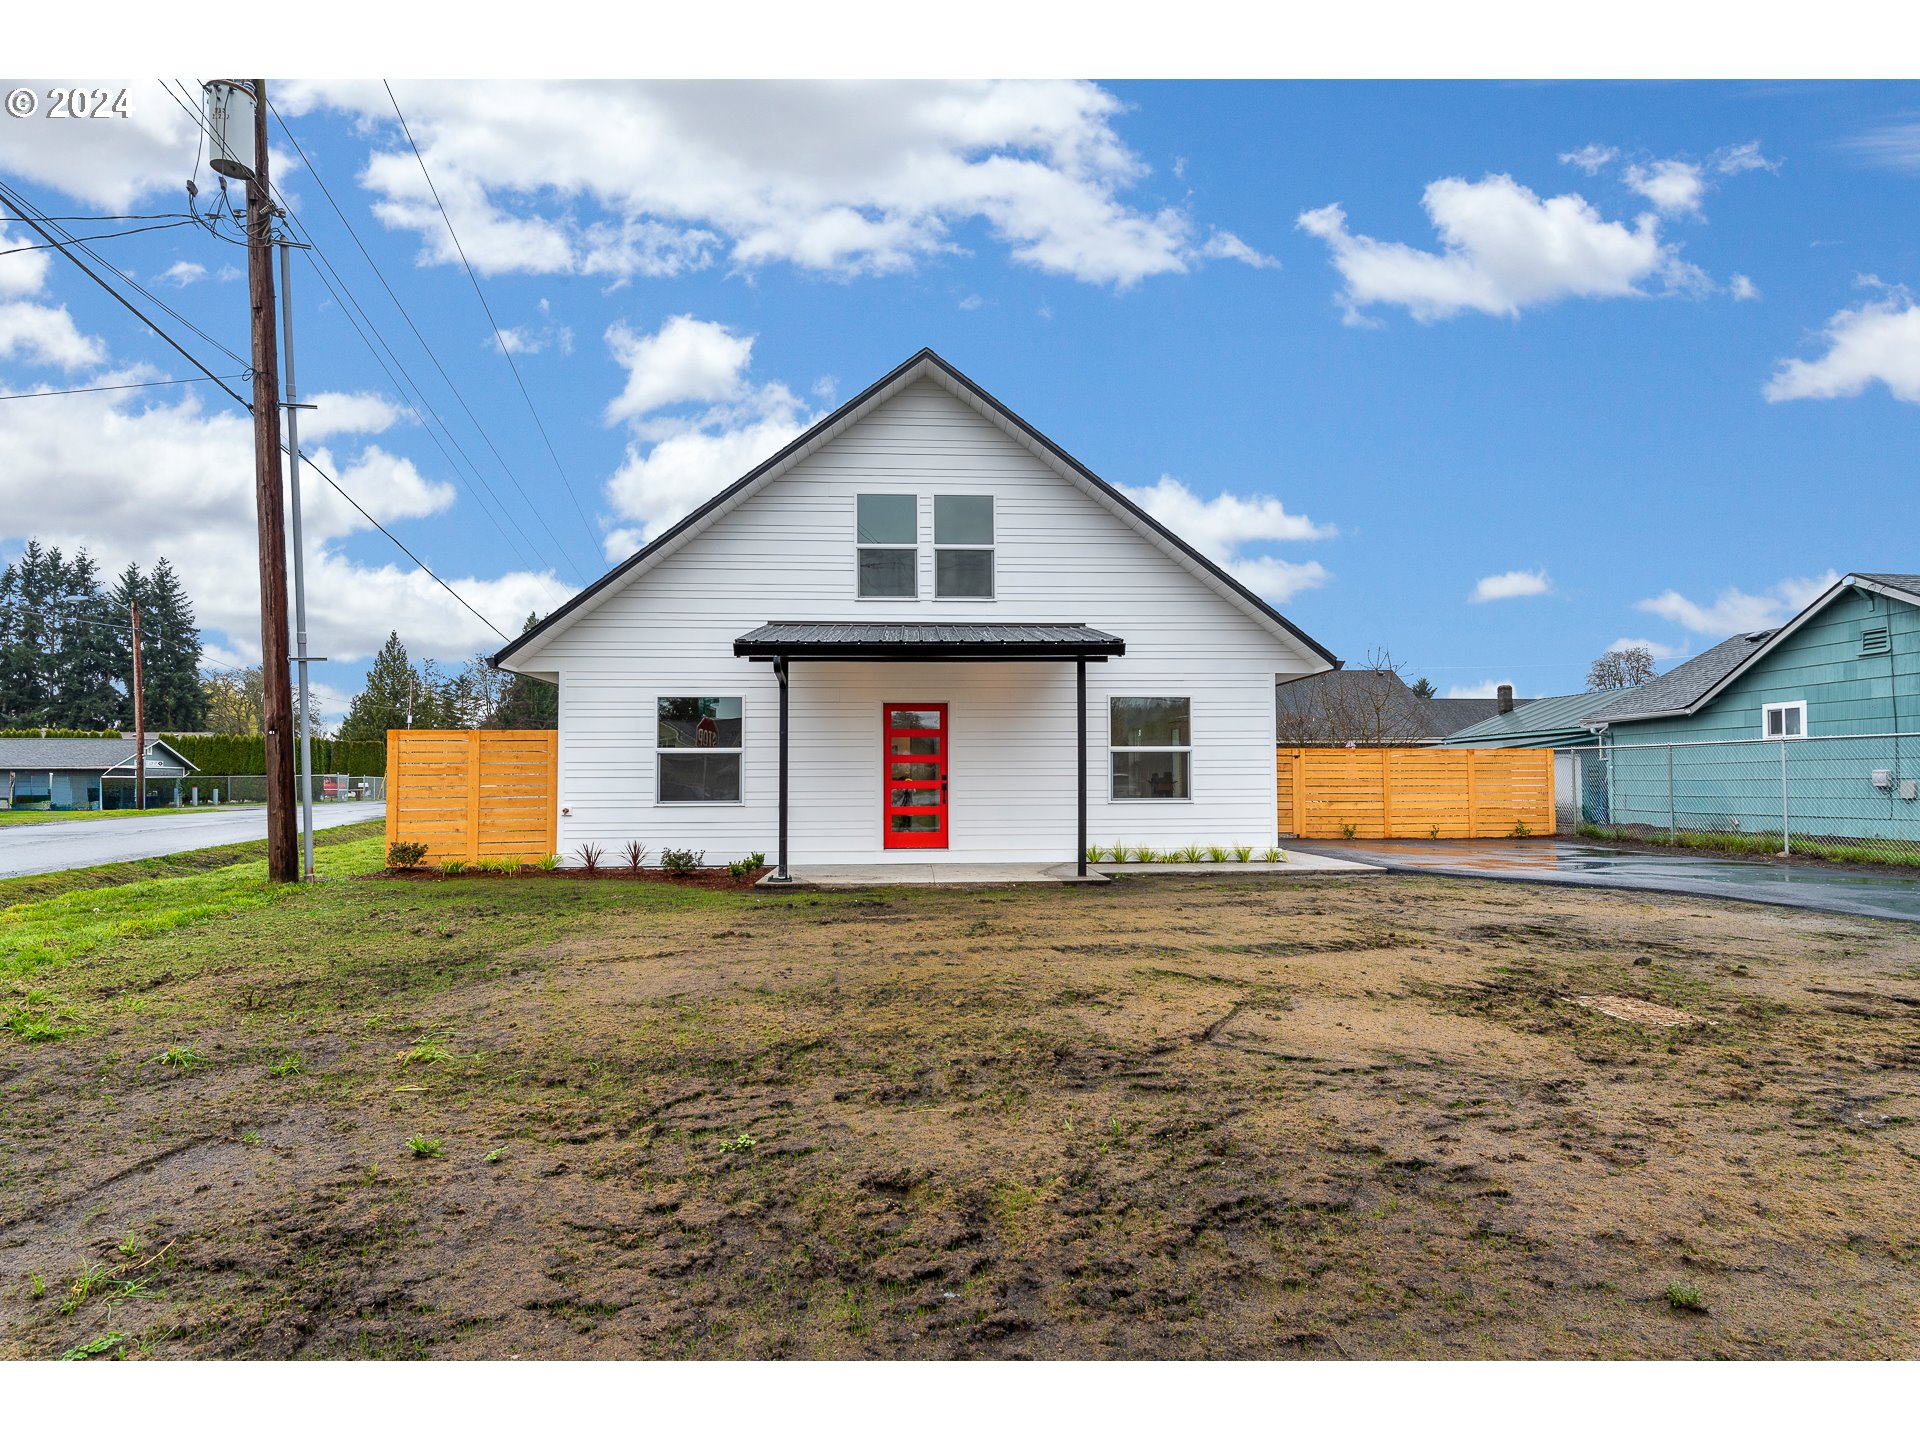 1417 S 8TH AVE, Kelso, WA 